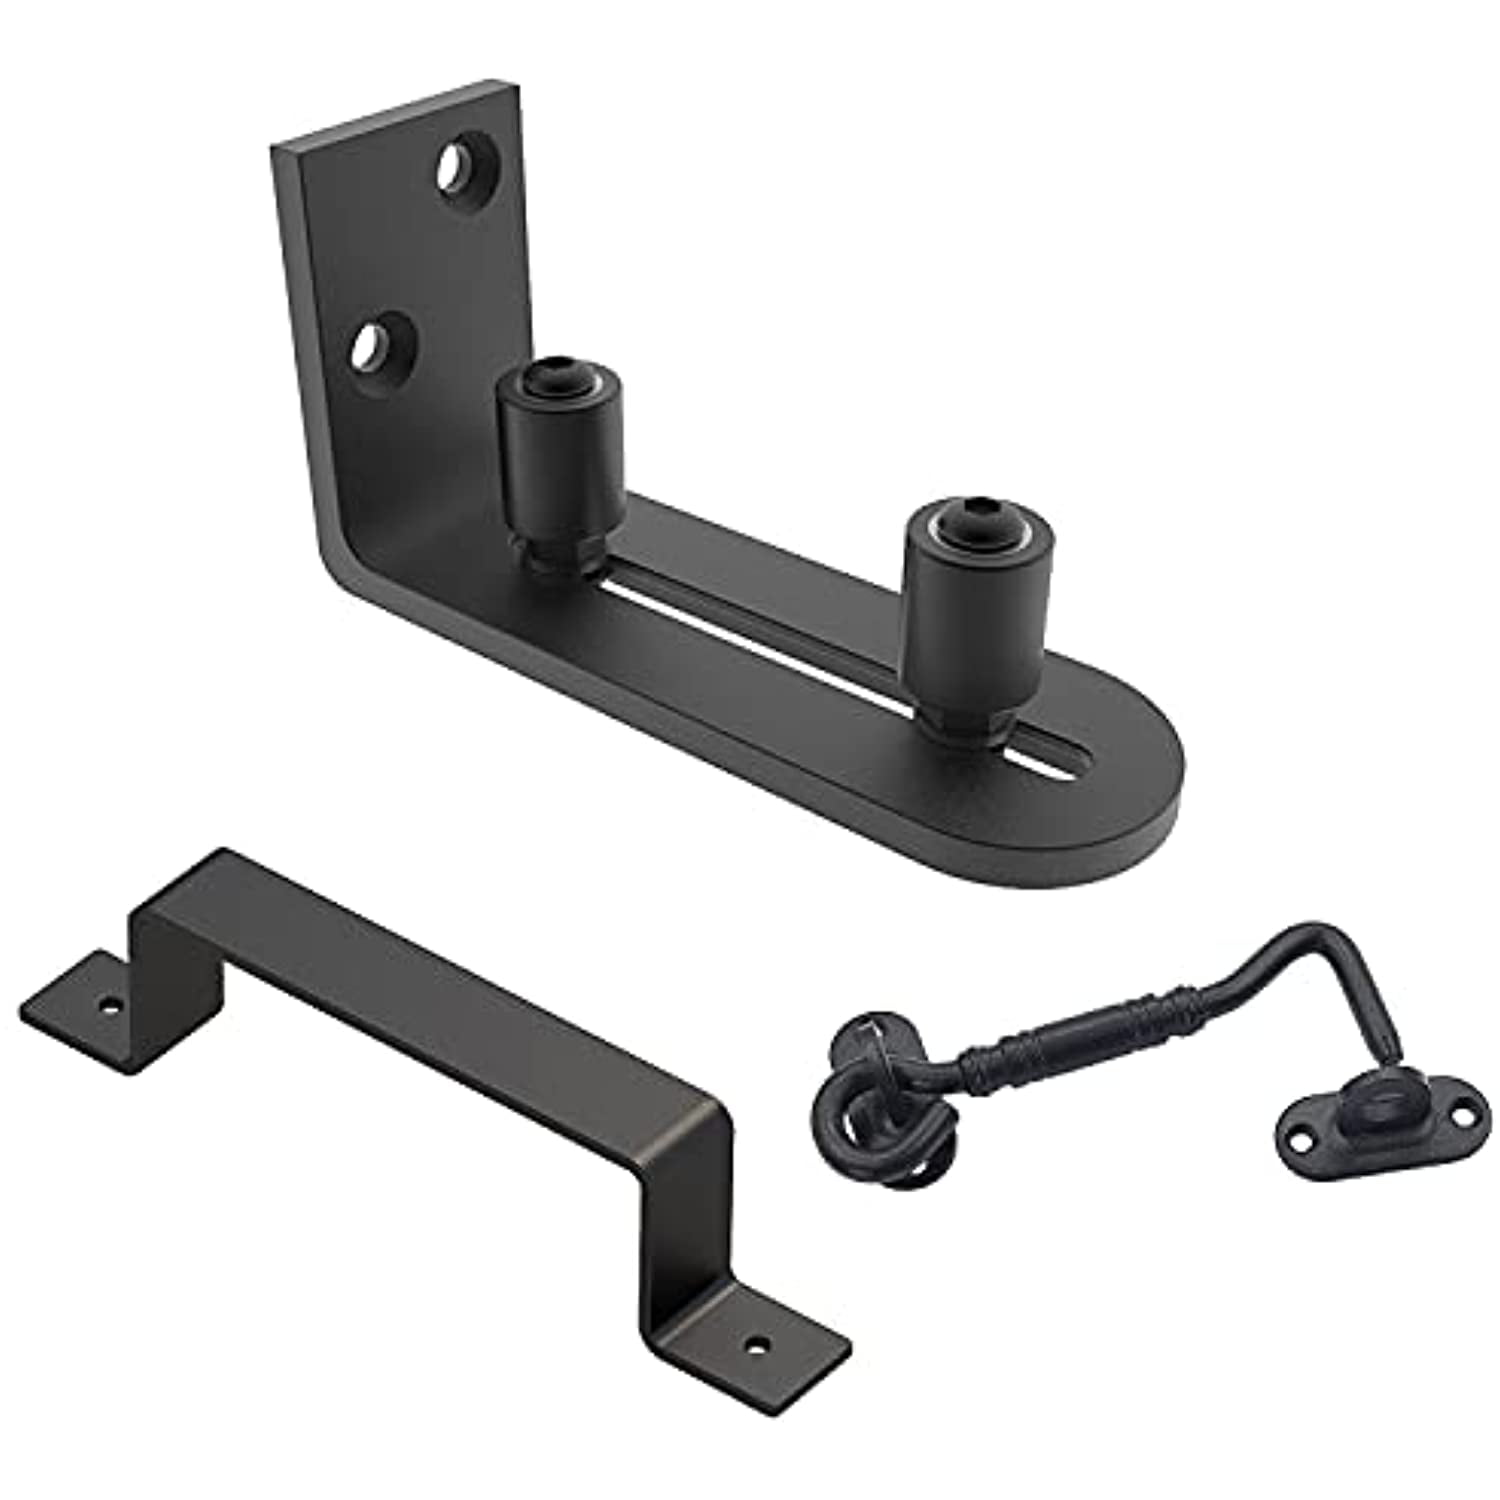 SANKEYTEW 12 Sliding Barn Door Handle Pull and Flush Hardware Set with Privacy Hook and Eye Latch Easy Lock Rustic Style Black Color 